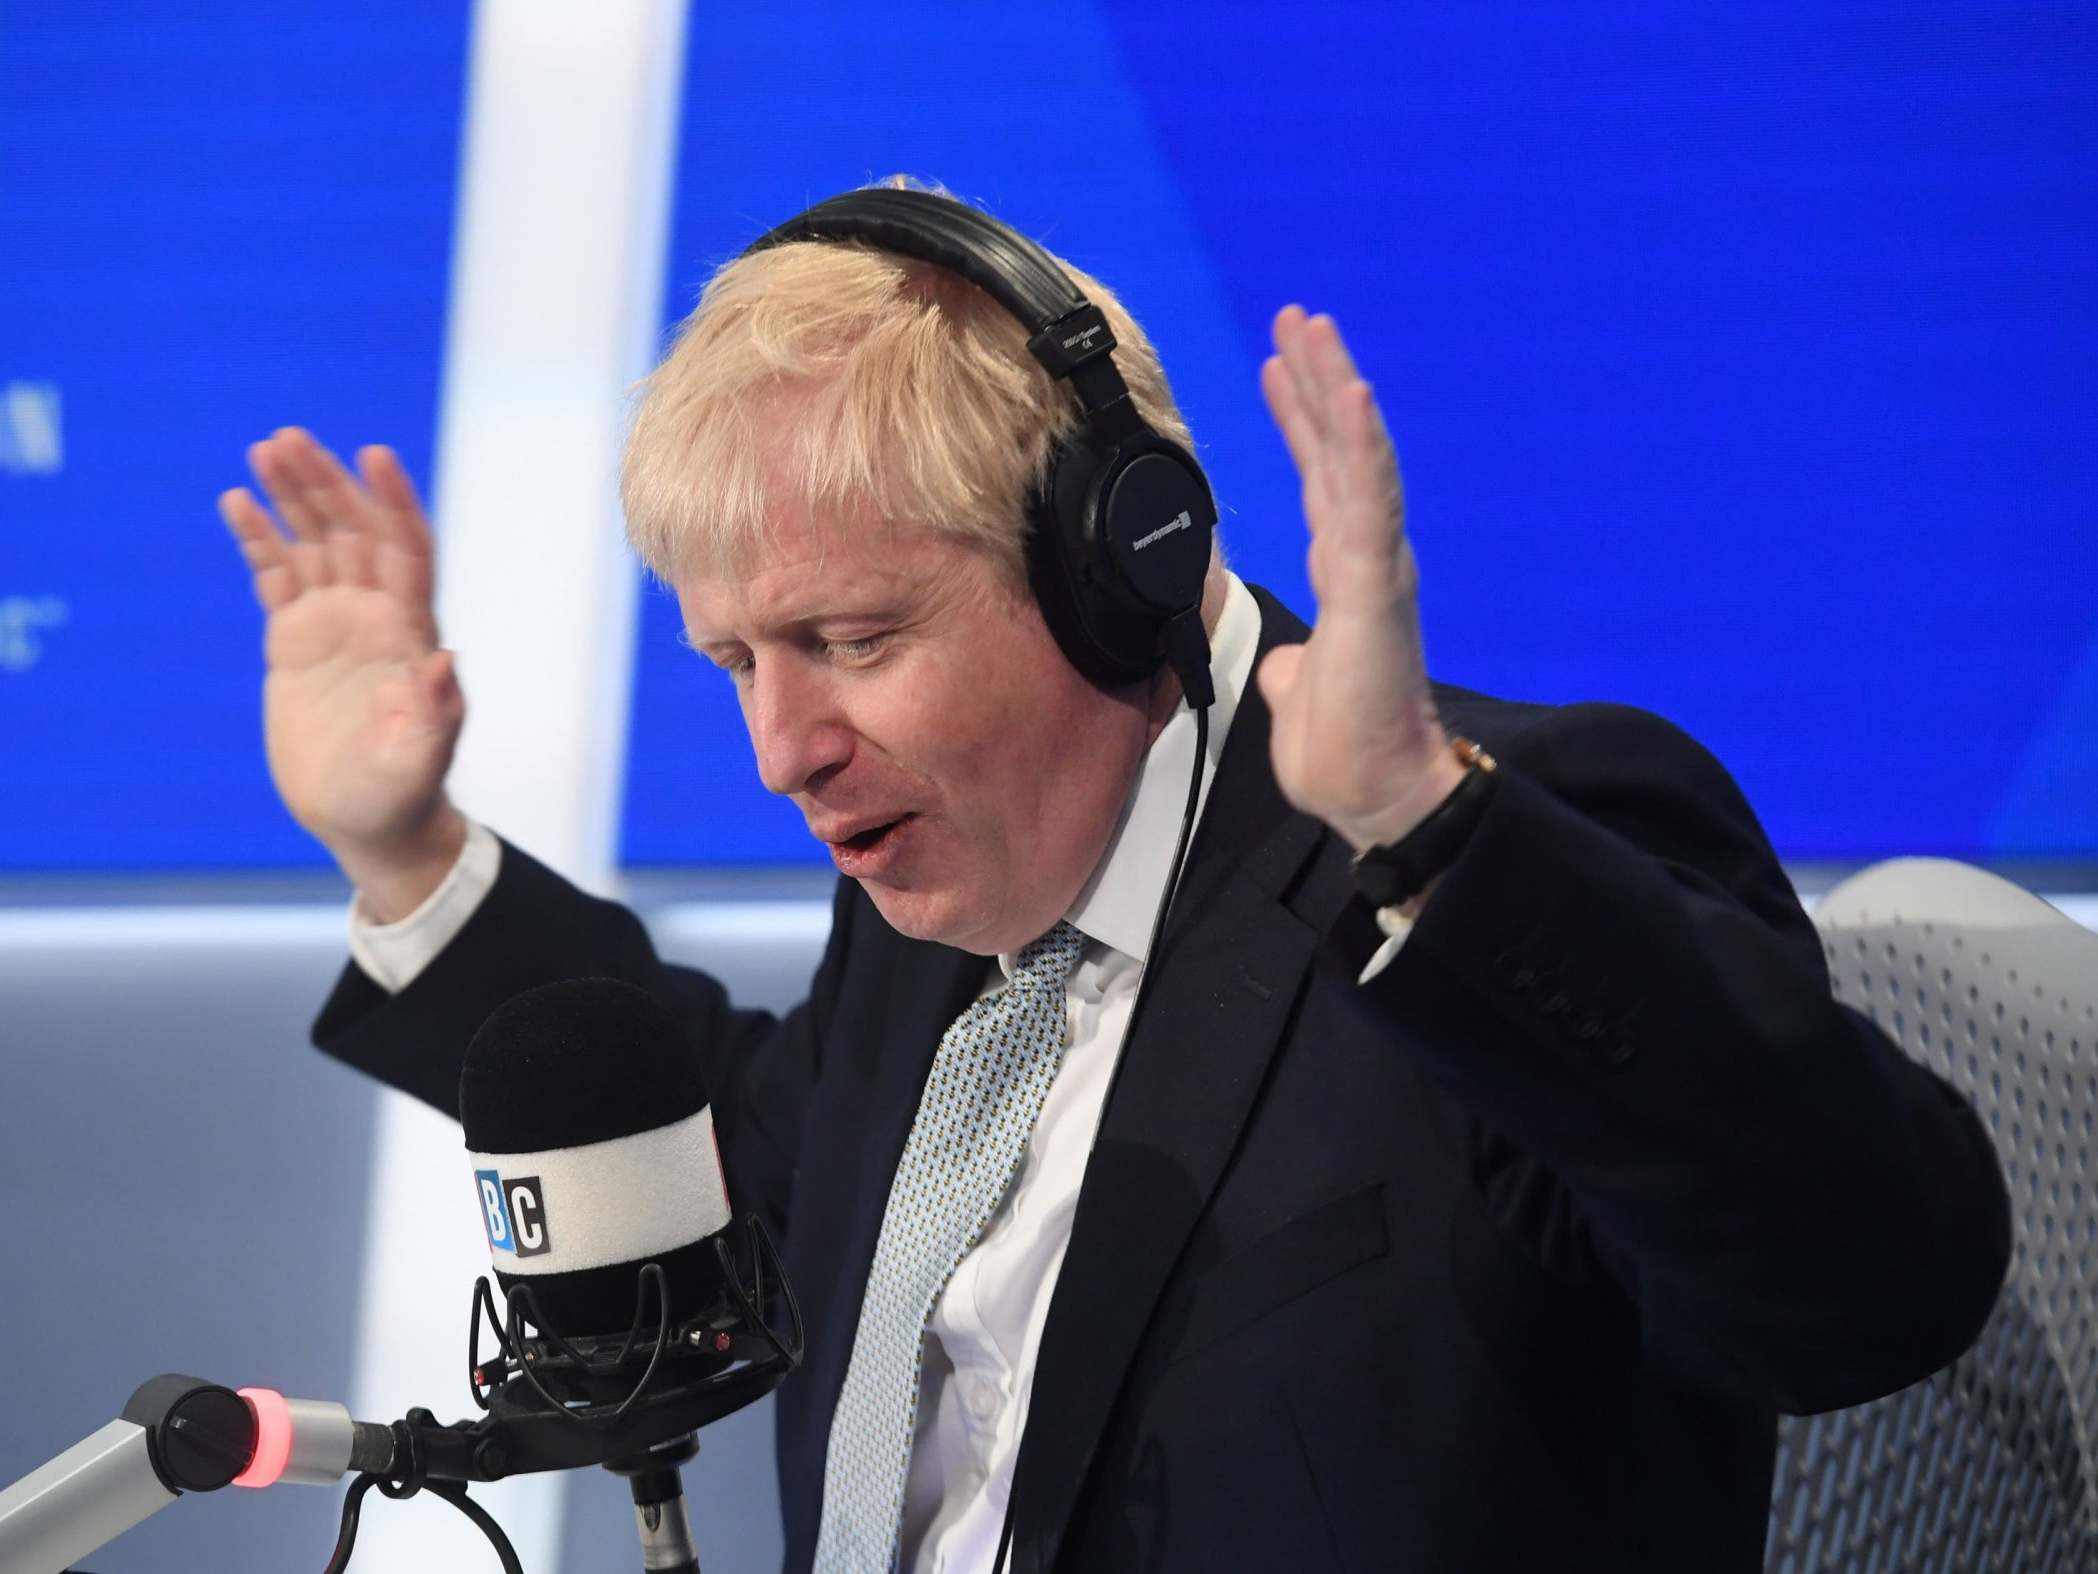 During an interview with LBC, Johnson again refused to explain the events which led to police being called to his partner’s flat